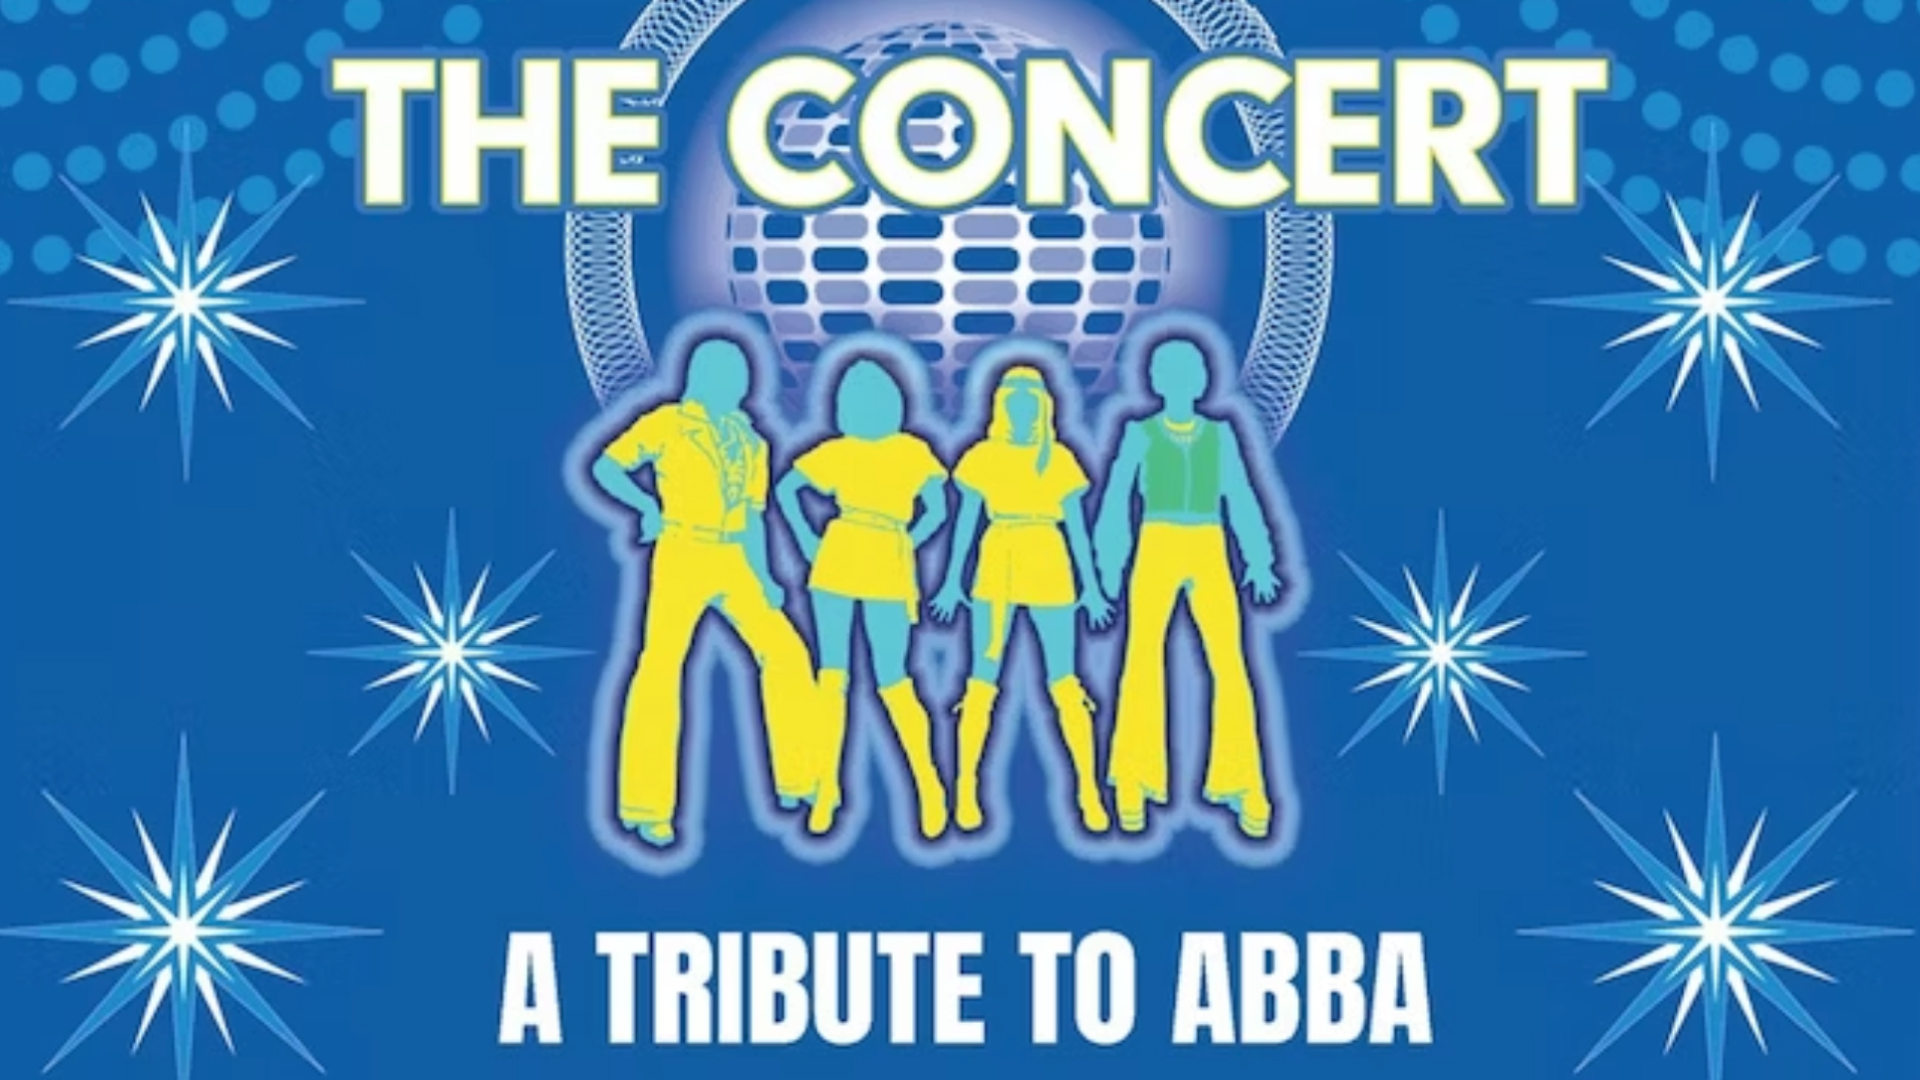 The Concert—A Tribute to ABBA